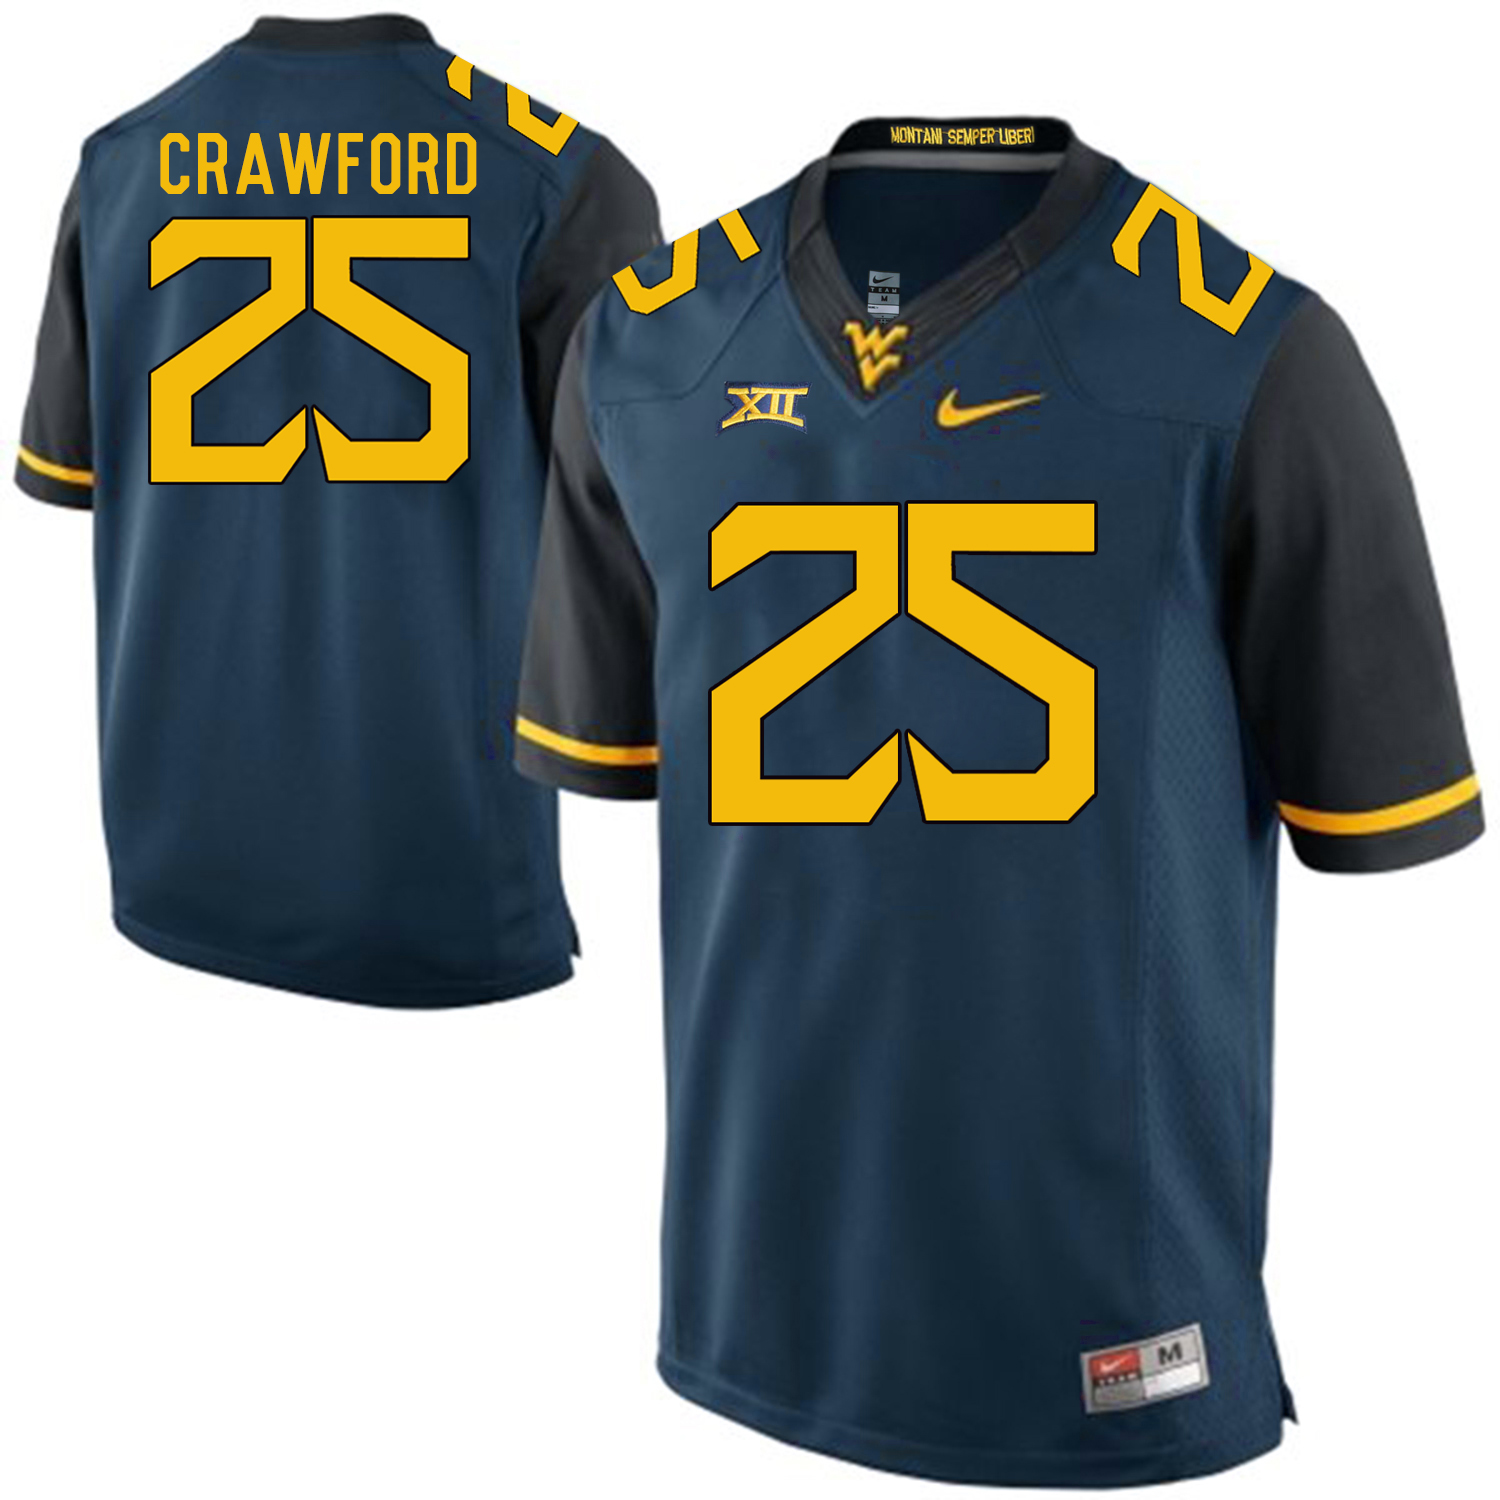 West Virginia Mountaineers 25 Justin Crawford Navy College Football Jersey